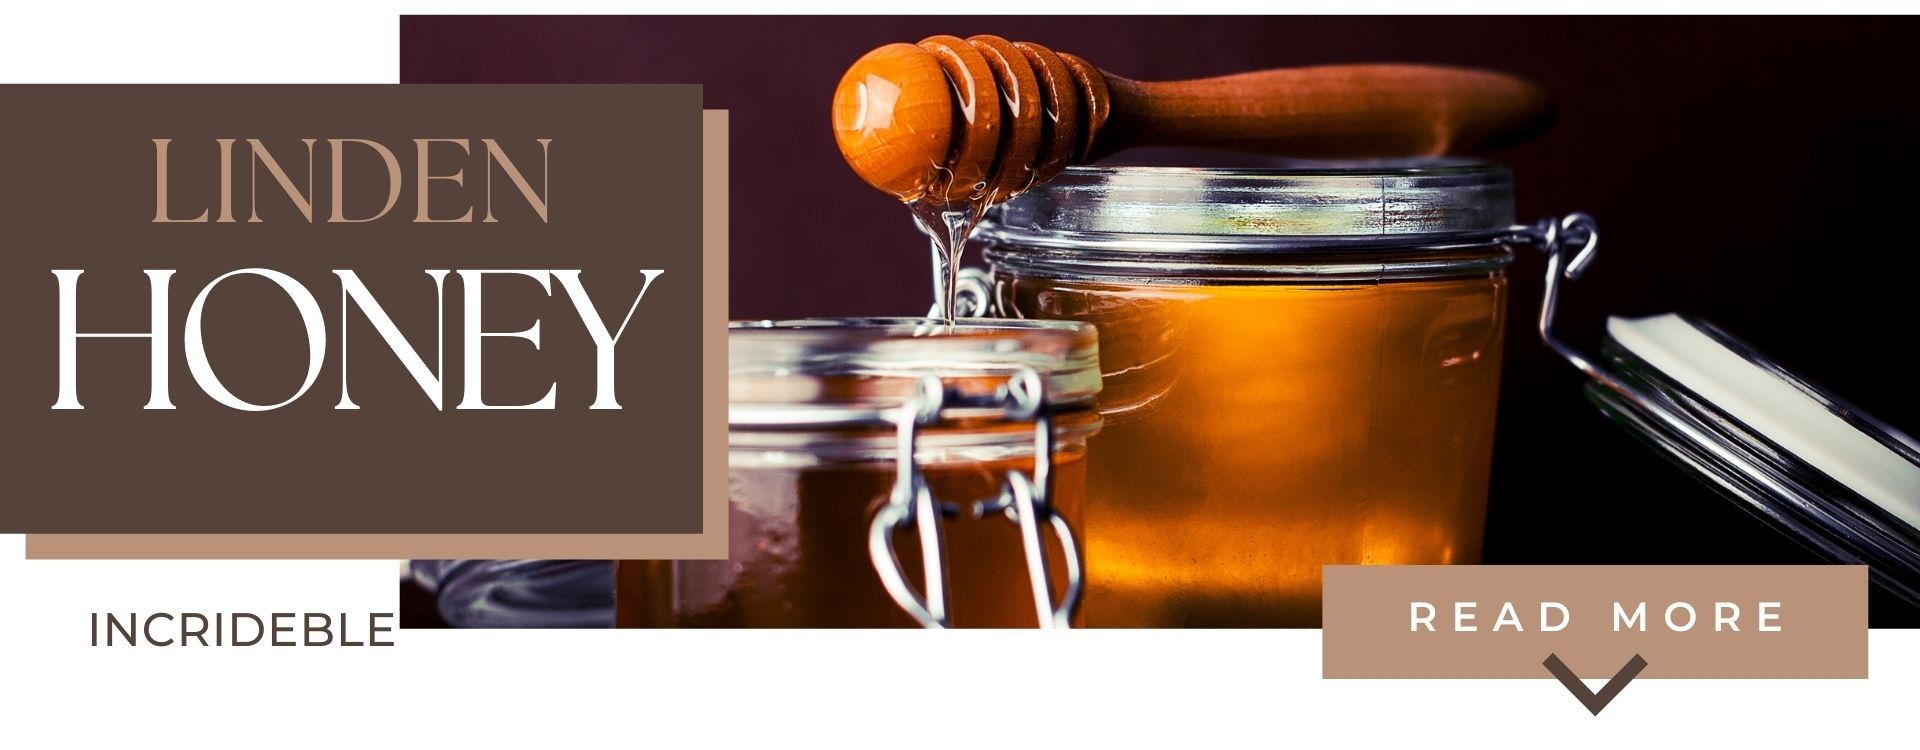 Linden honey is one of the best kinds of honey in the earth.